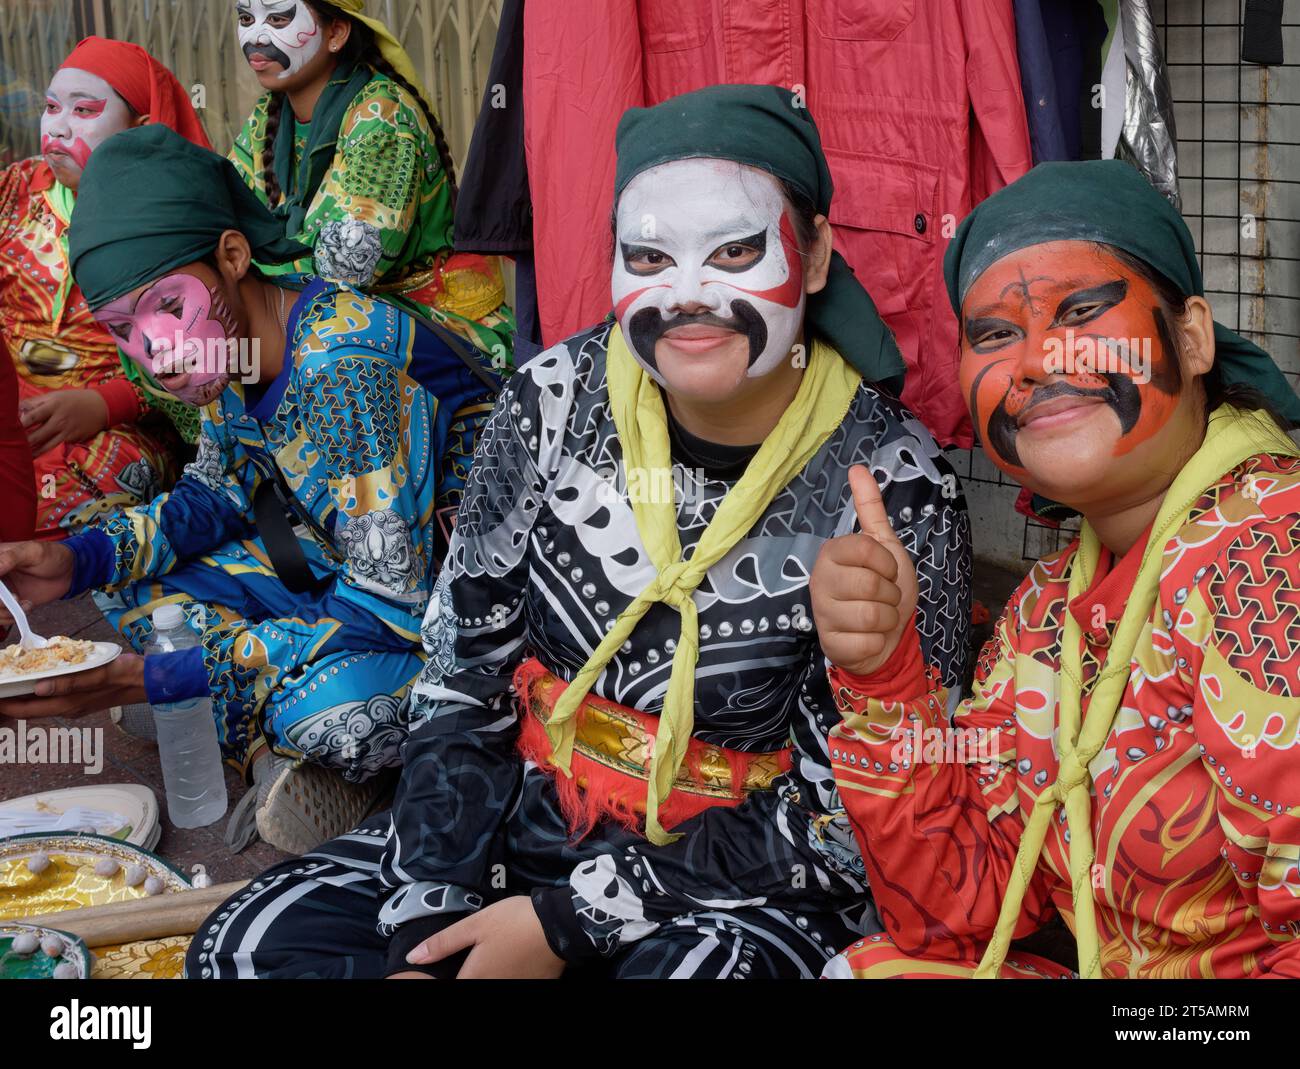 Members of a Lion Dance troupe with exotic dress and colorfully painted faces waiting for their performance at a Taoist shrine in Bangkok, Thailand Stock Photo